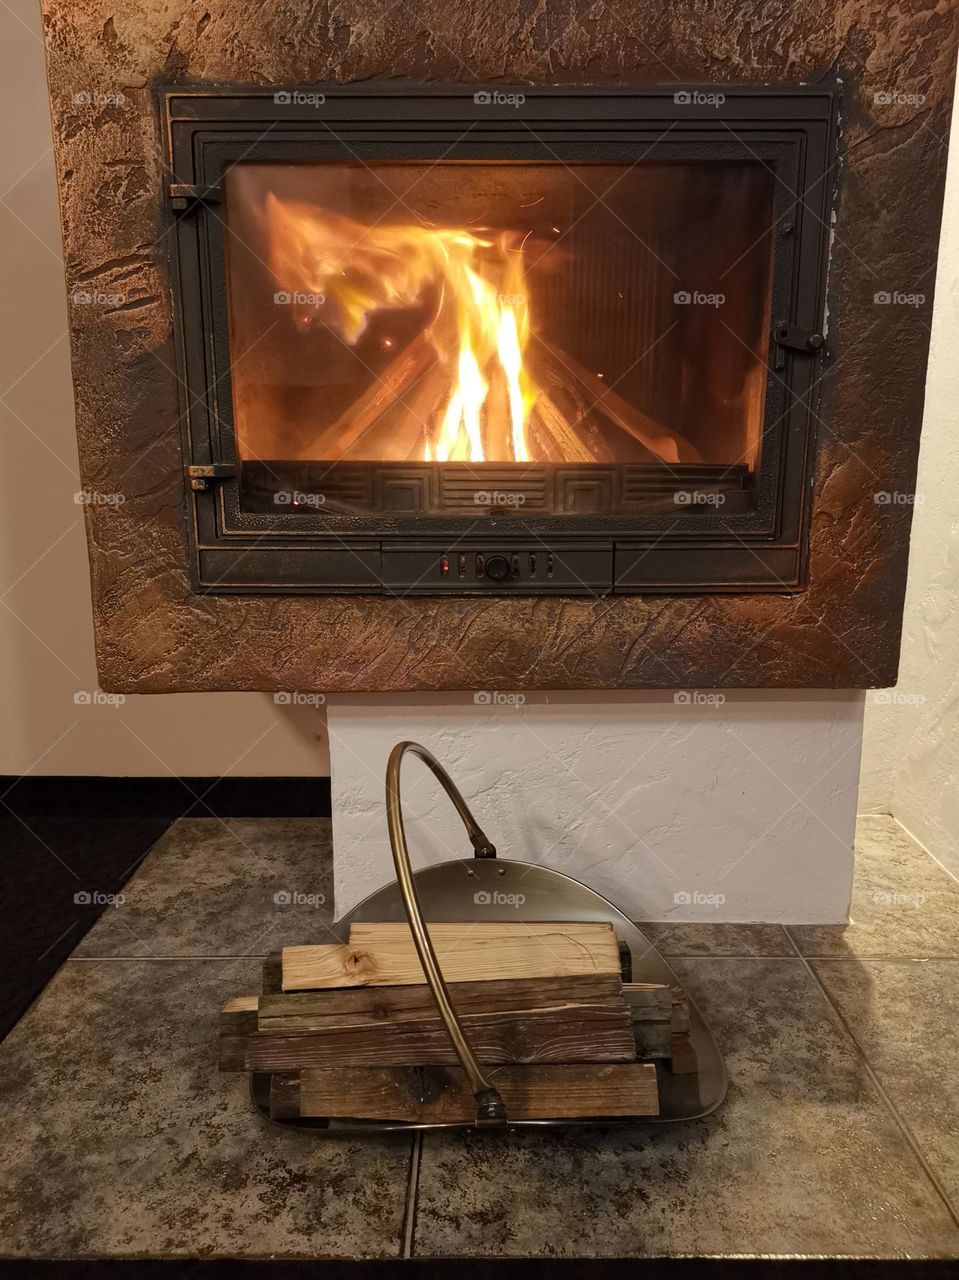 The fireplace is not only warm, but also cozy in the house. You can look at the fire endlessly, it is so calming and warming. Gas prices have risen, we will heat our houses with firewood.